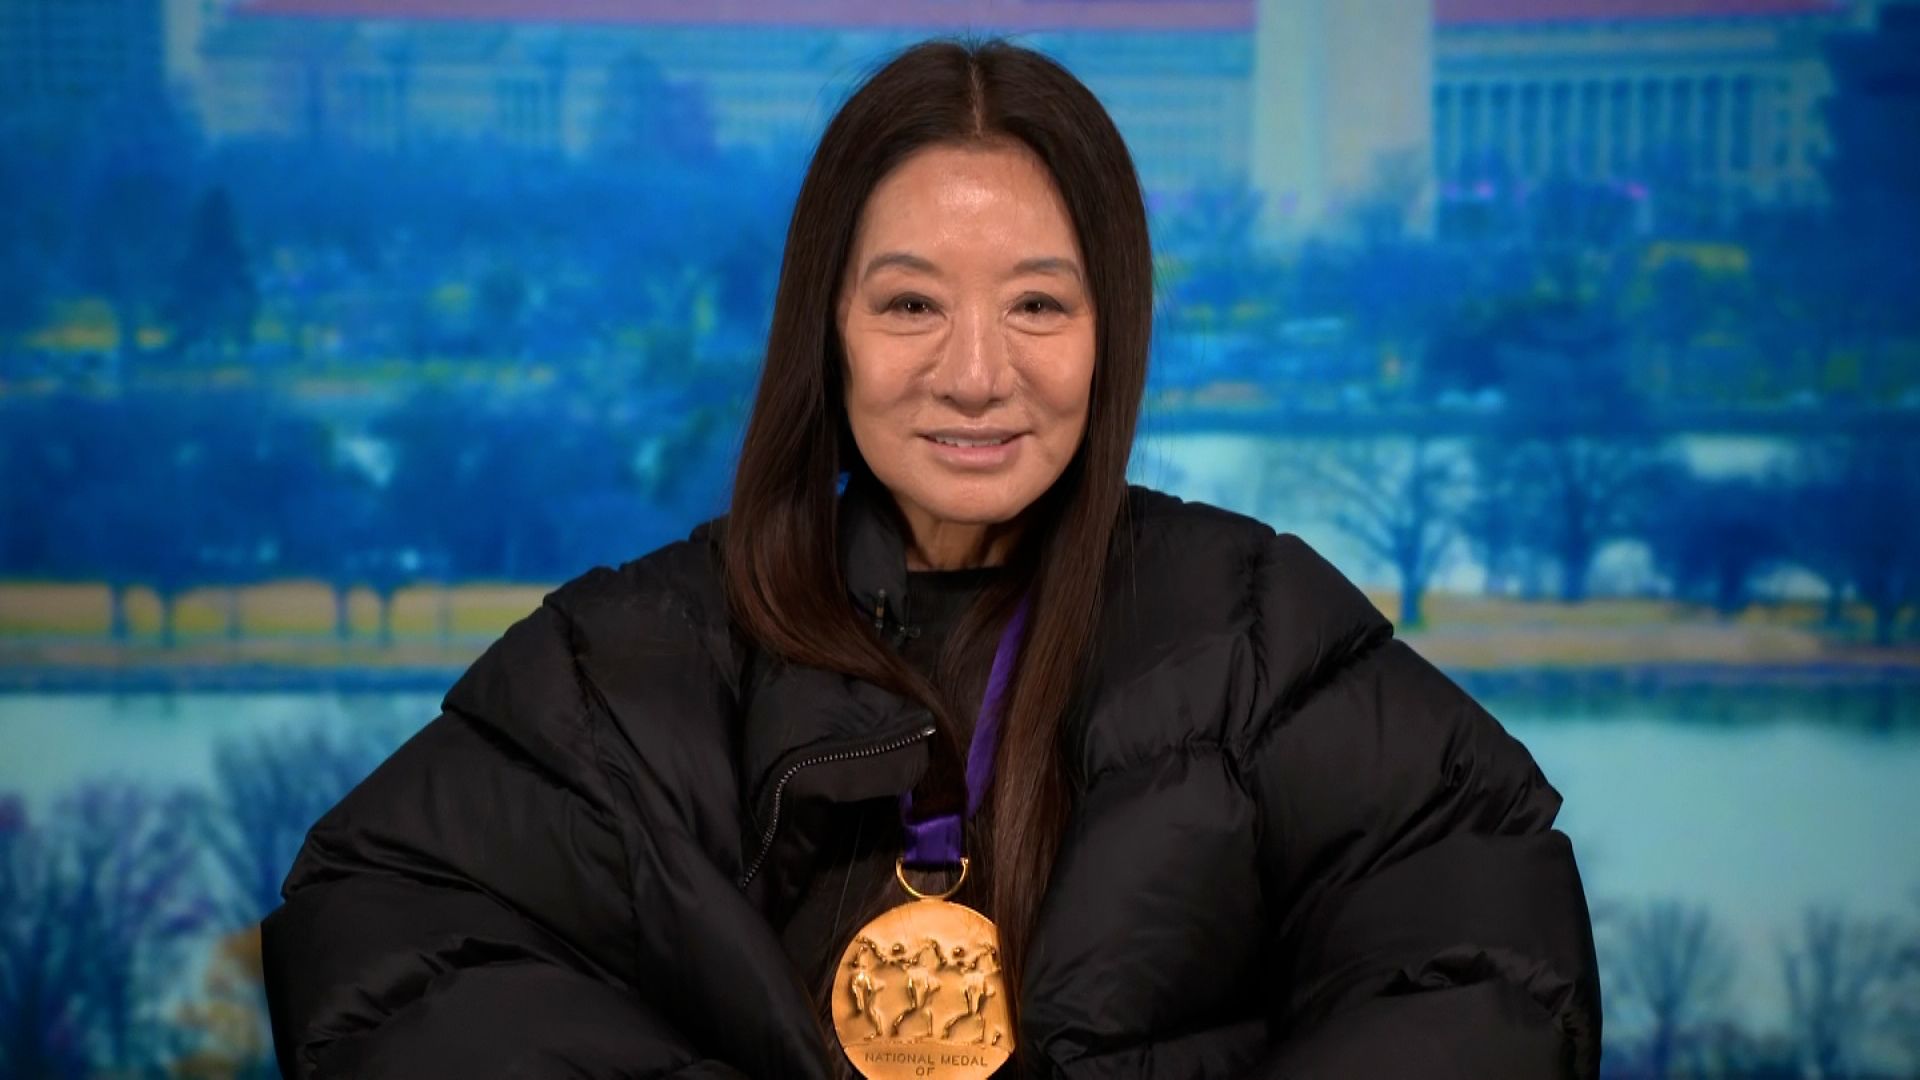 Out of body experience': Vera Wang honored with National Medal of